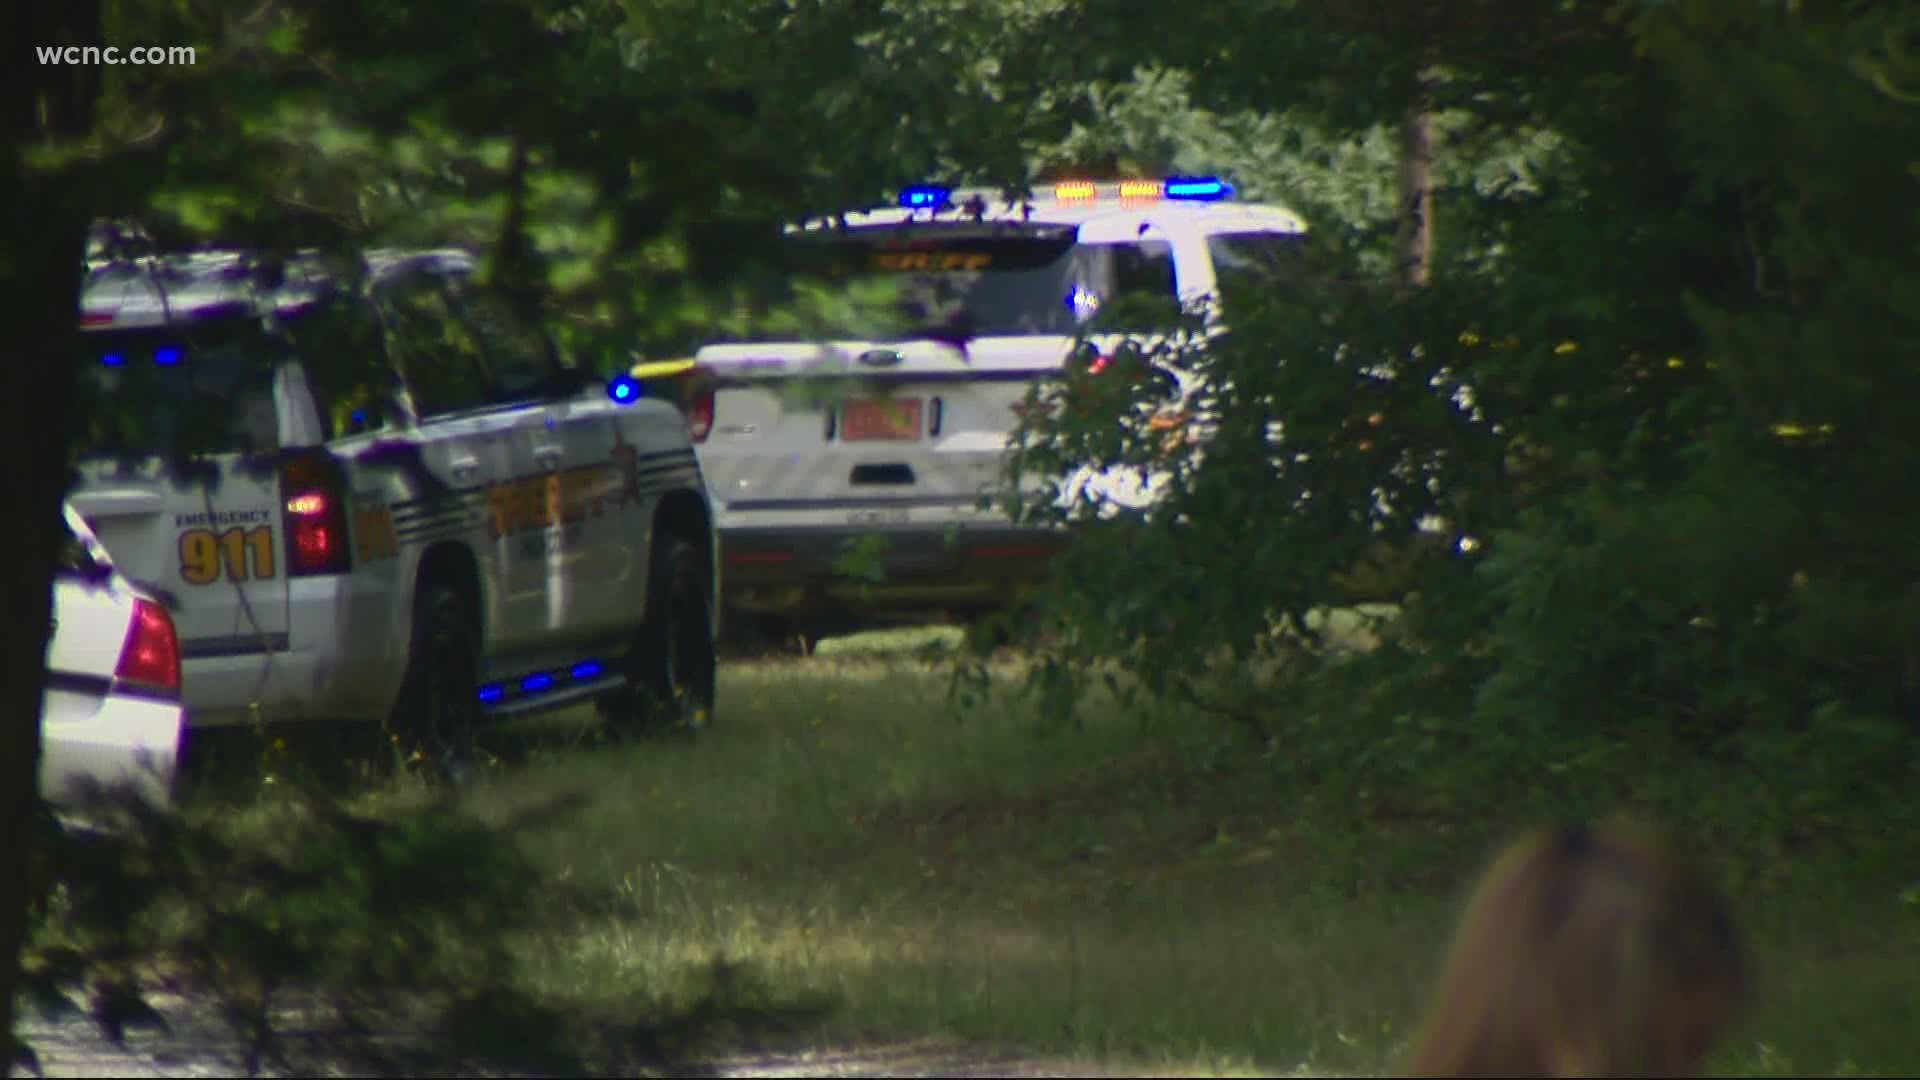 A Union County deputy shot a man after a reported disturbance at a church Sunday morning.